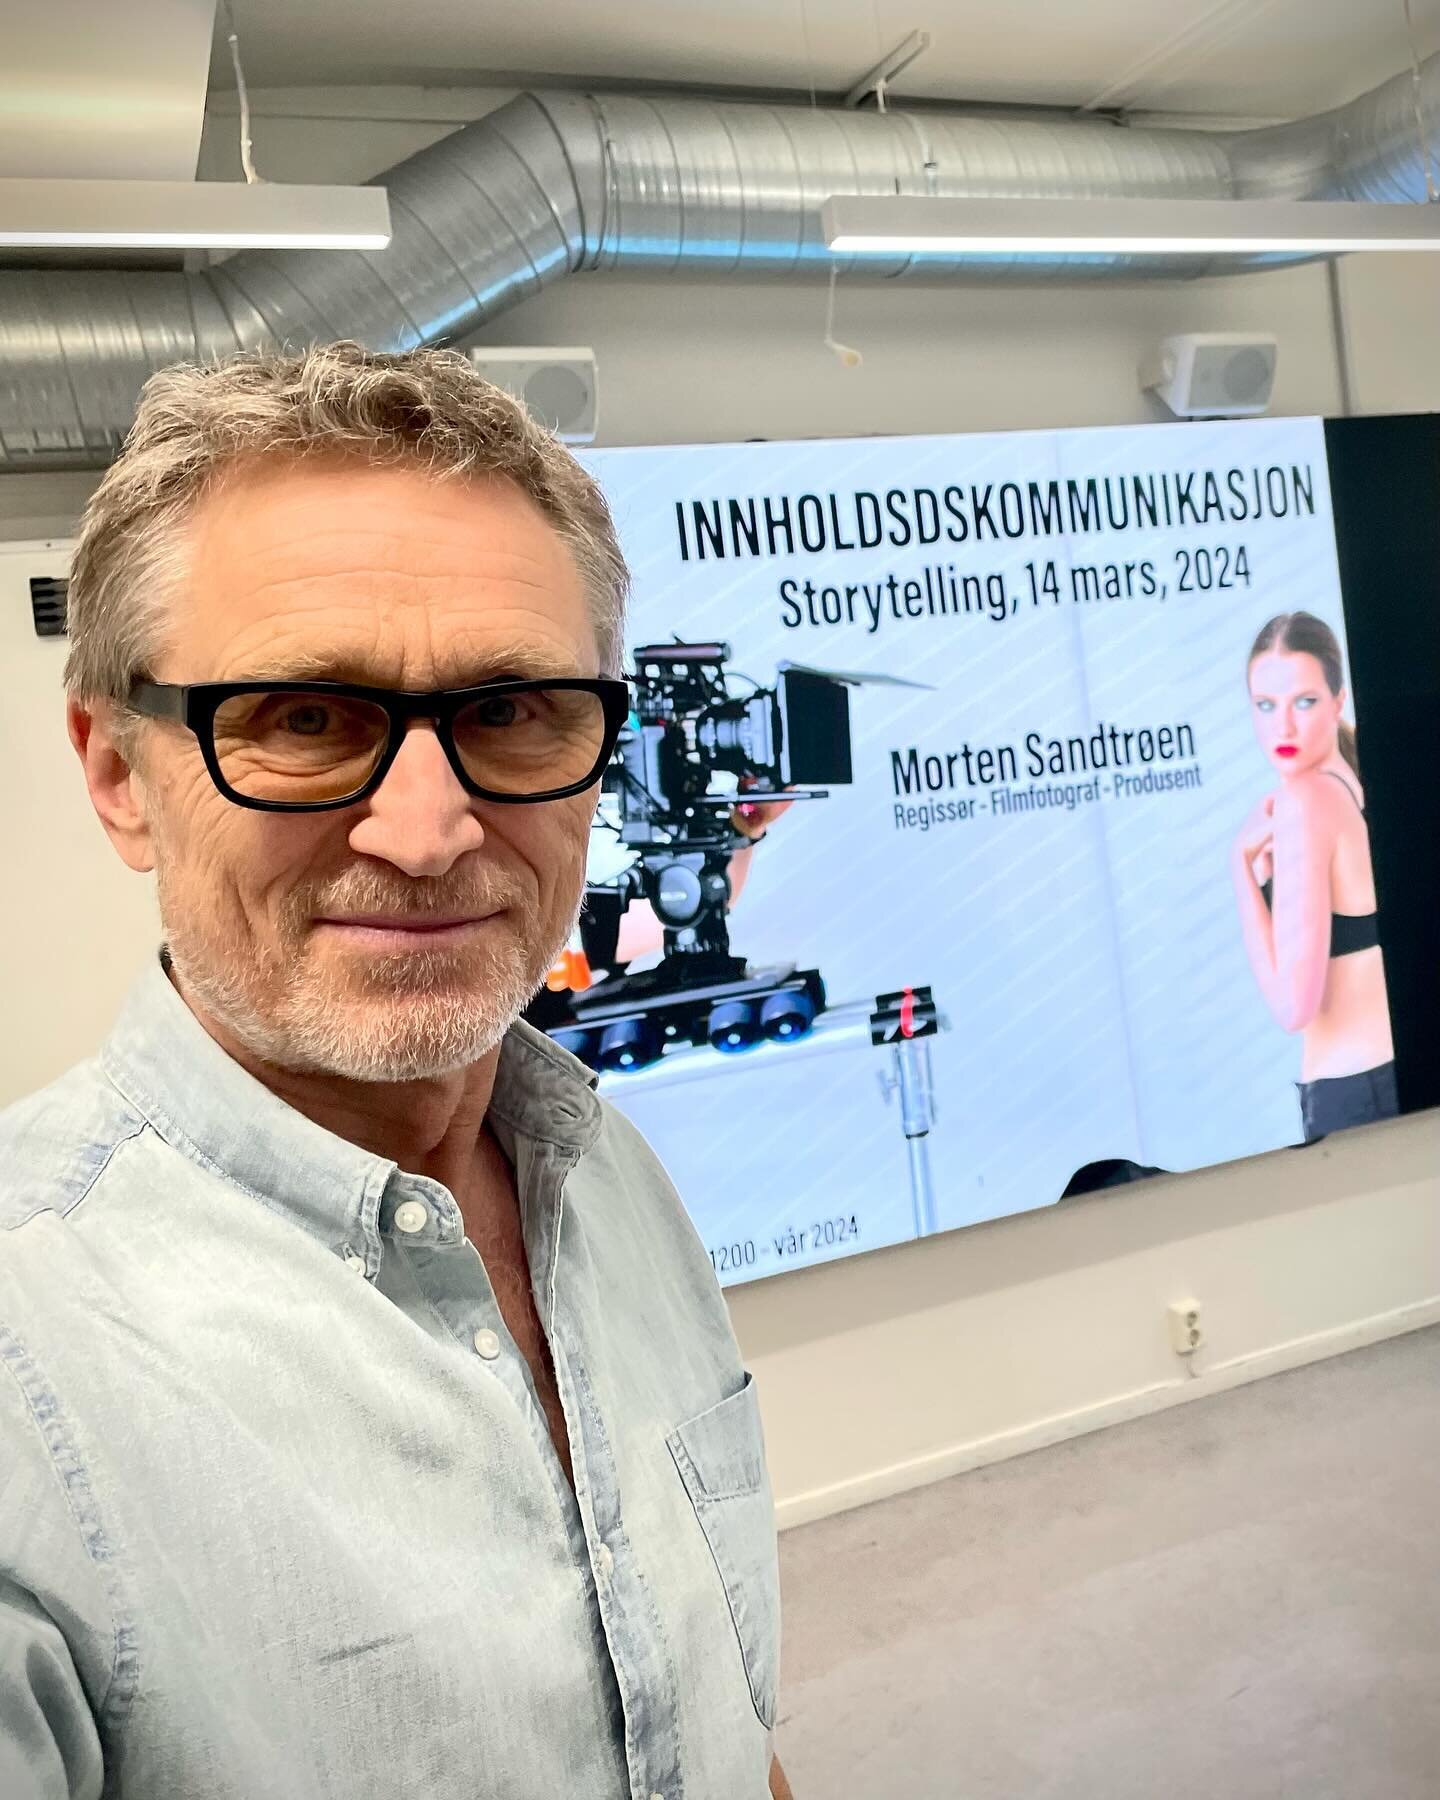 Back at it. This time 100+ first year bachelor students at @hkristiania and the subject is Content Communication. First two sessions Storytelling and Pre-production. Great group of students and I&rsquo;m looking forward to seeing stories come alive i